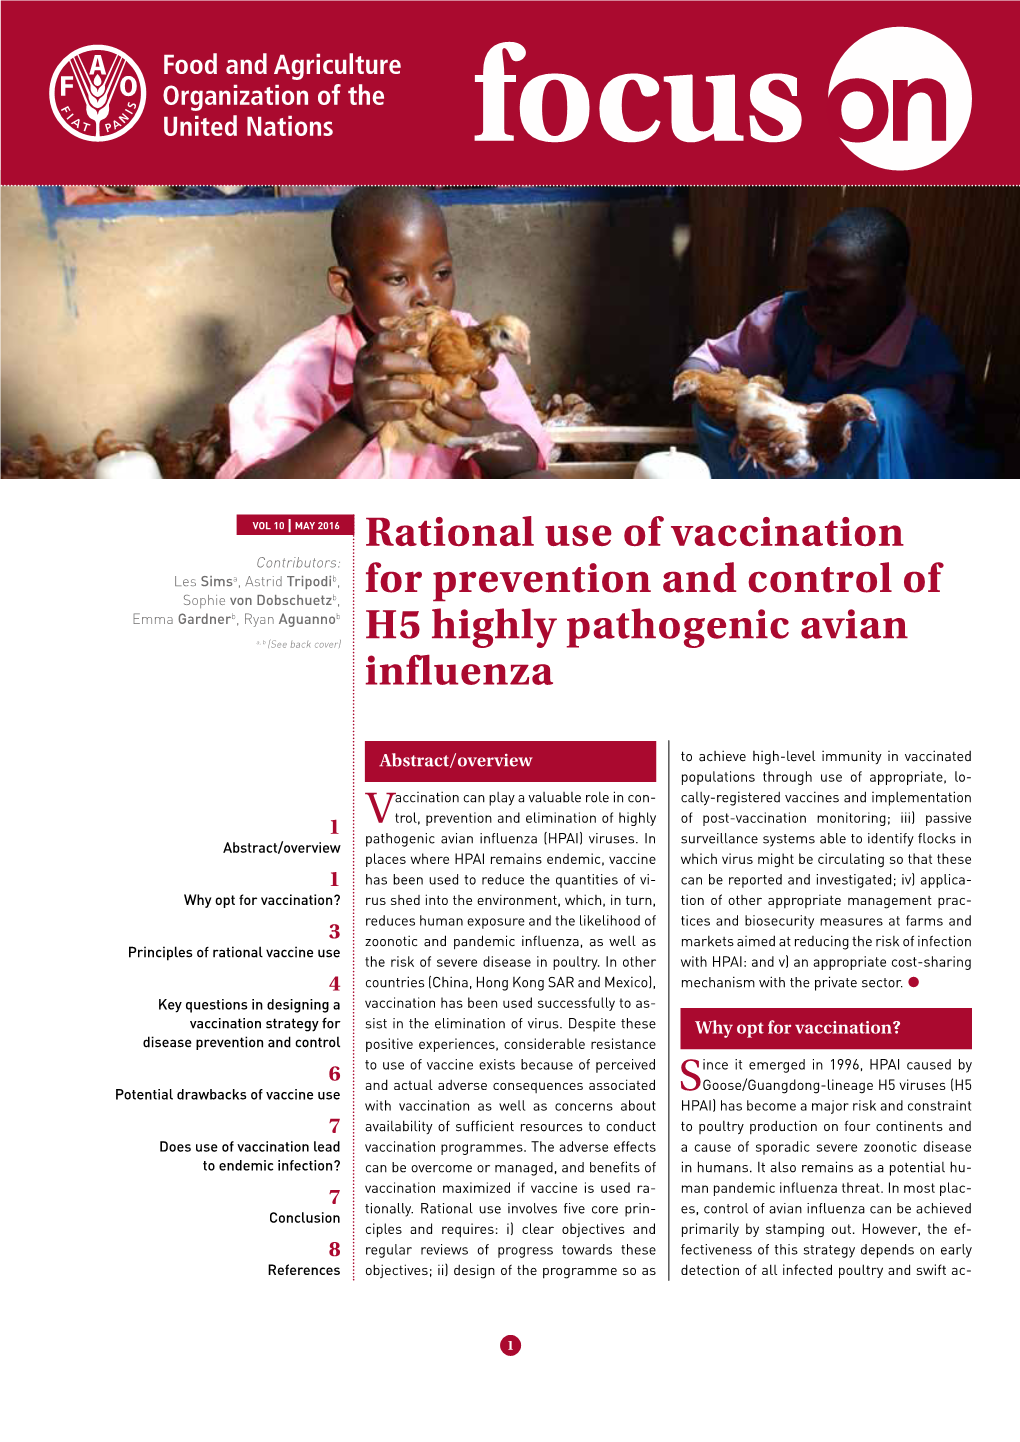 Rational Use of Vaccination for Prevention and Control of H5 Highly